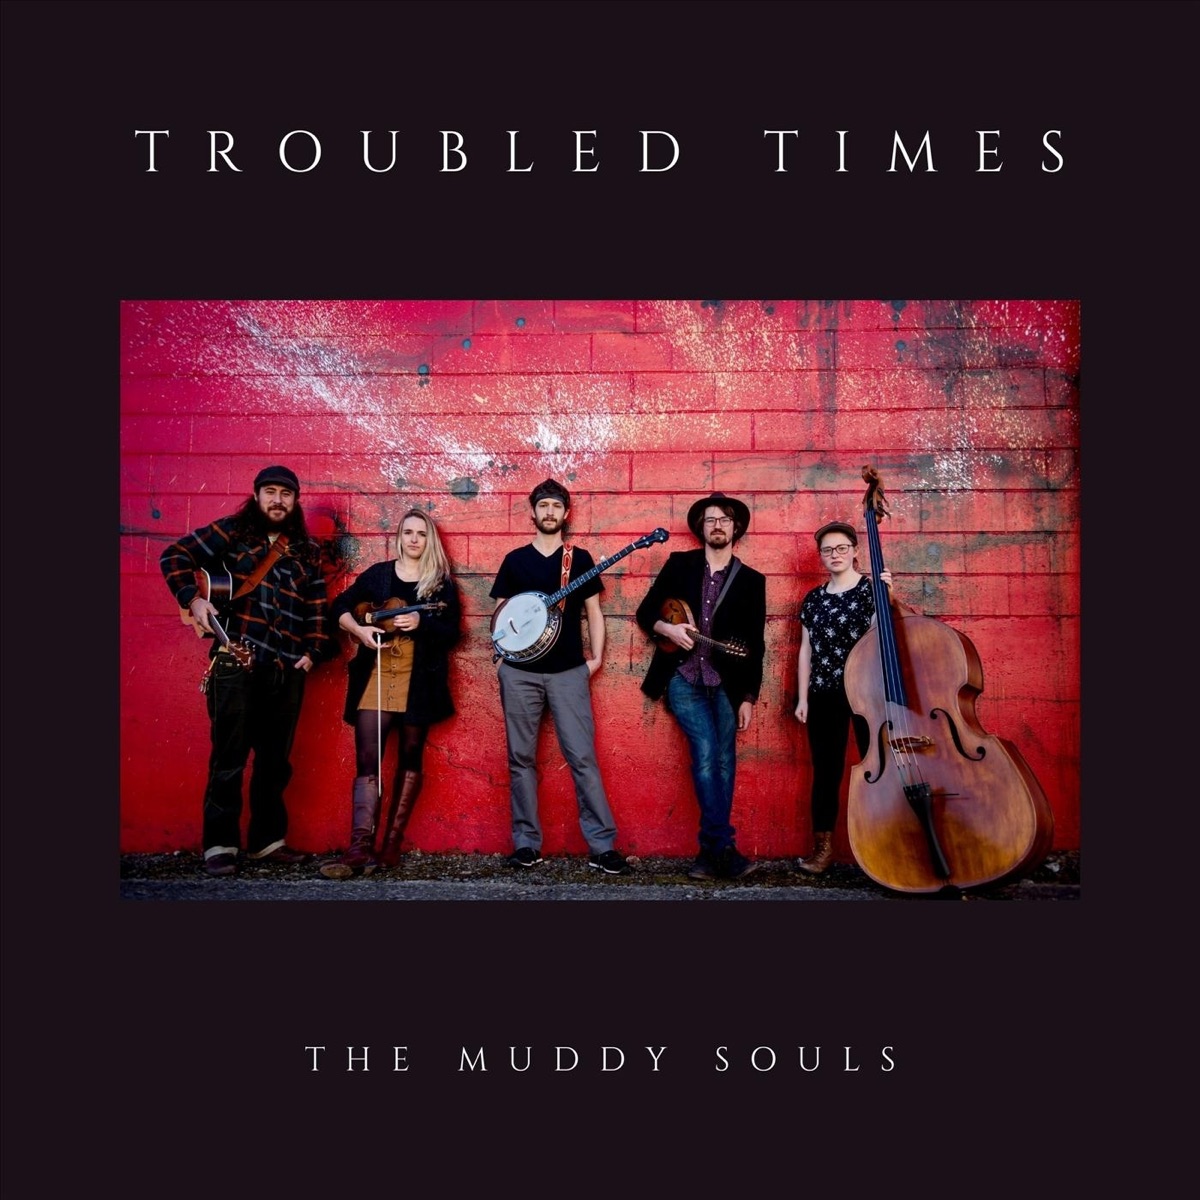 The Muddy Souls - Album by The Muddy Souls - Apple Music